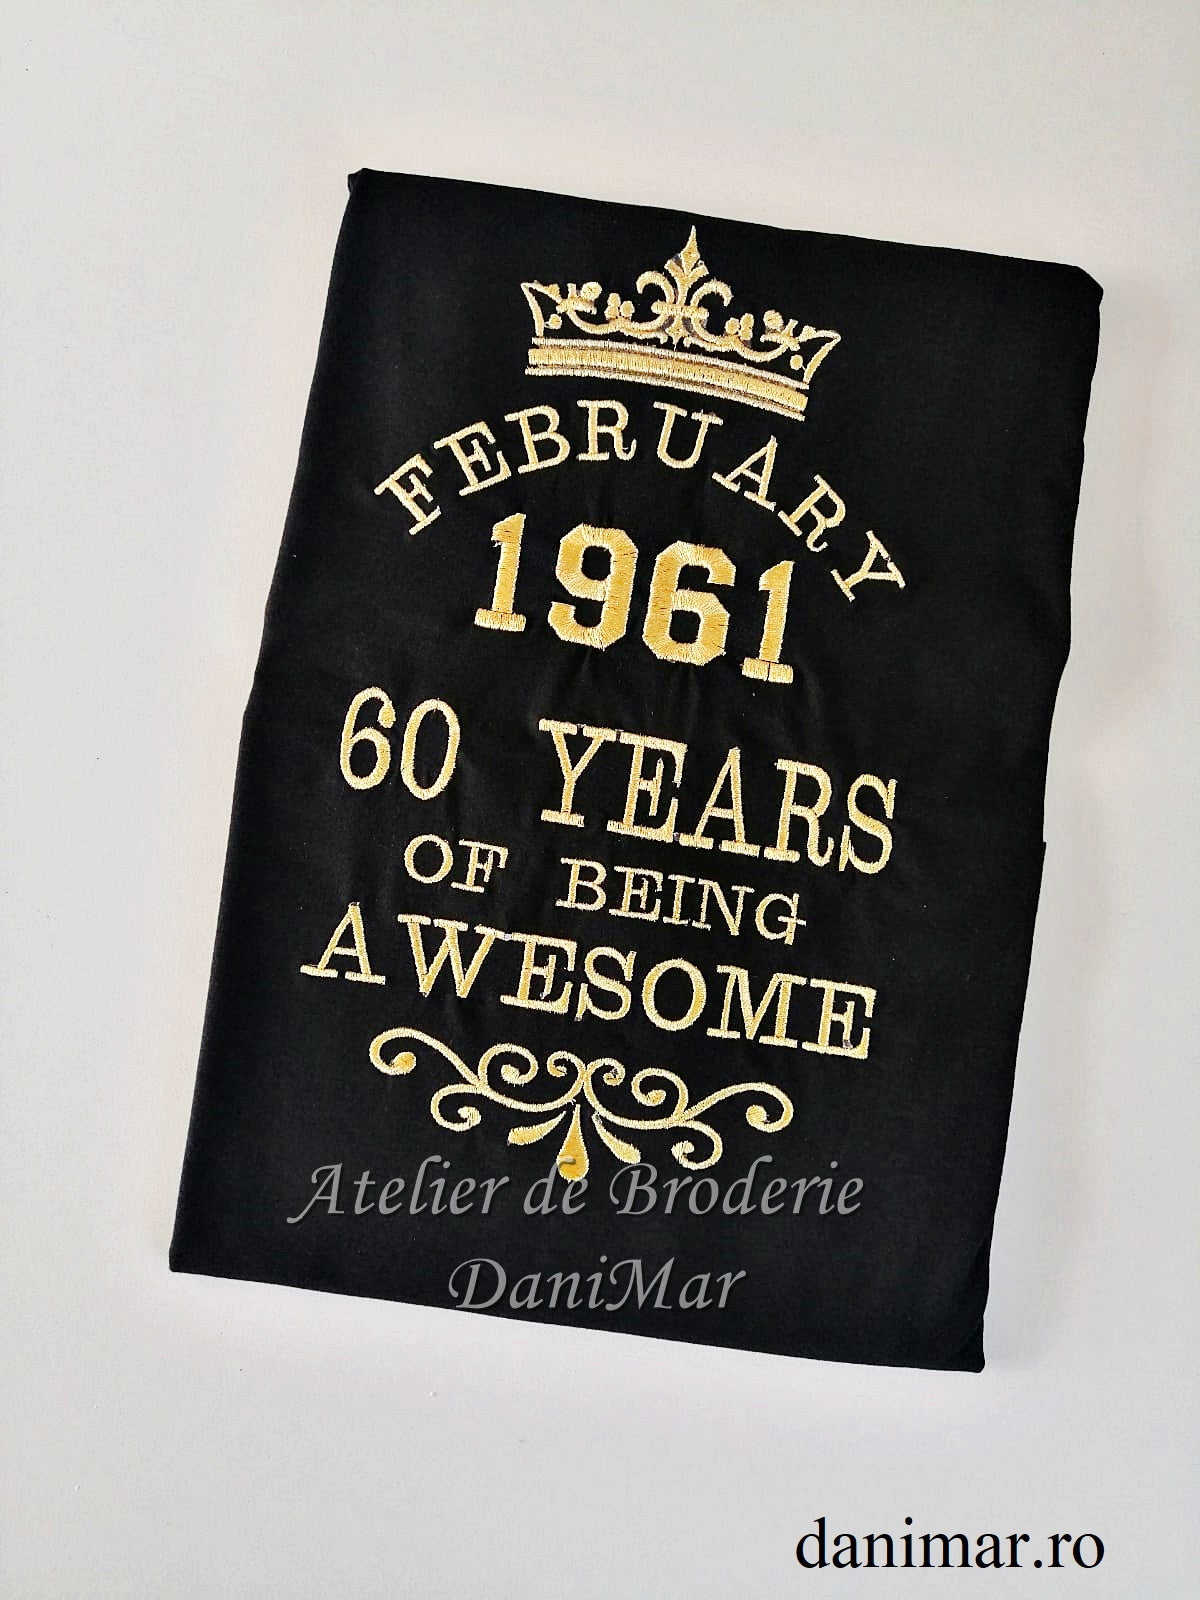 Tricou aniversar - 60 Years of being awesome - DaniMar 